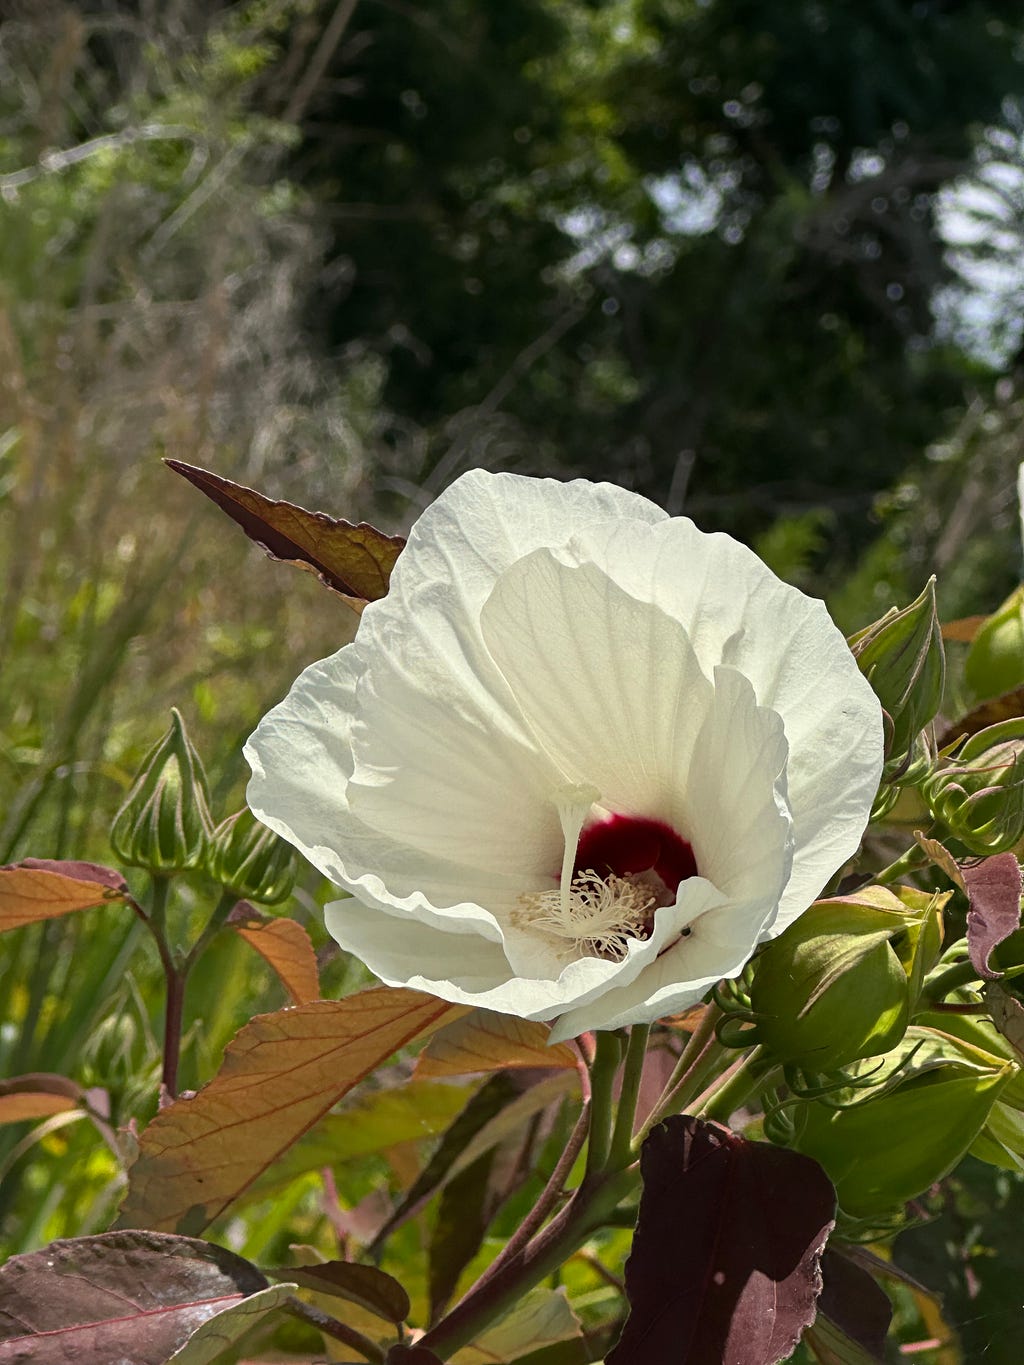 Large white flower with a deep crimson center.